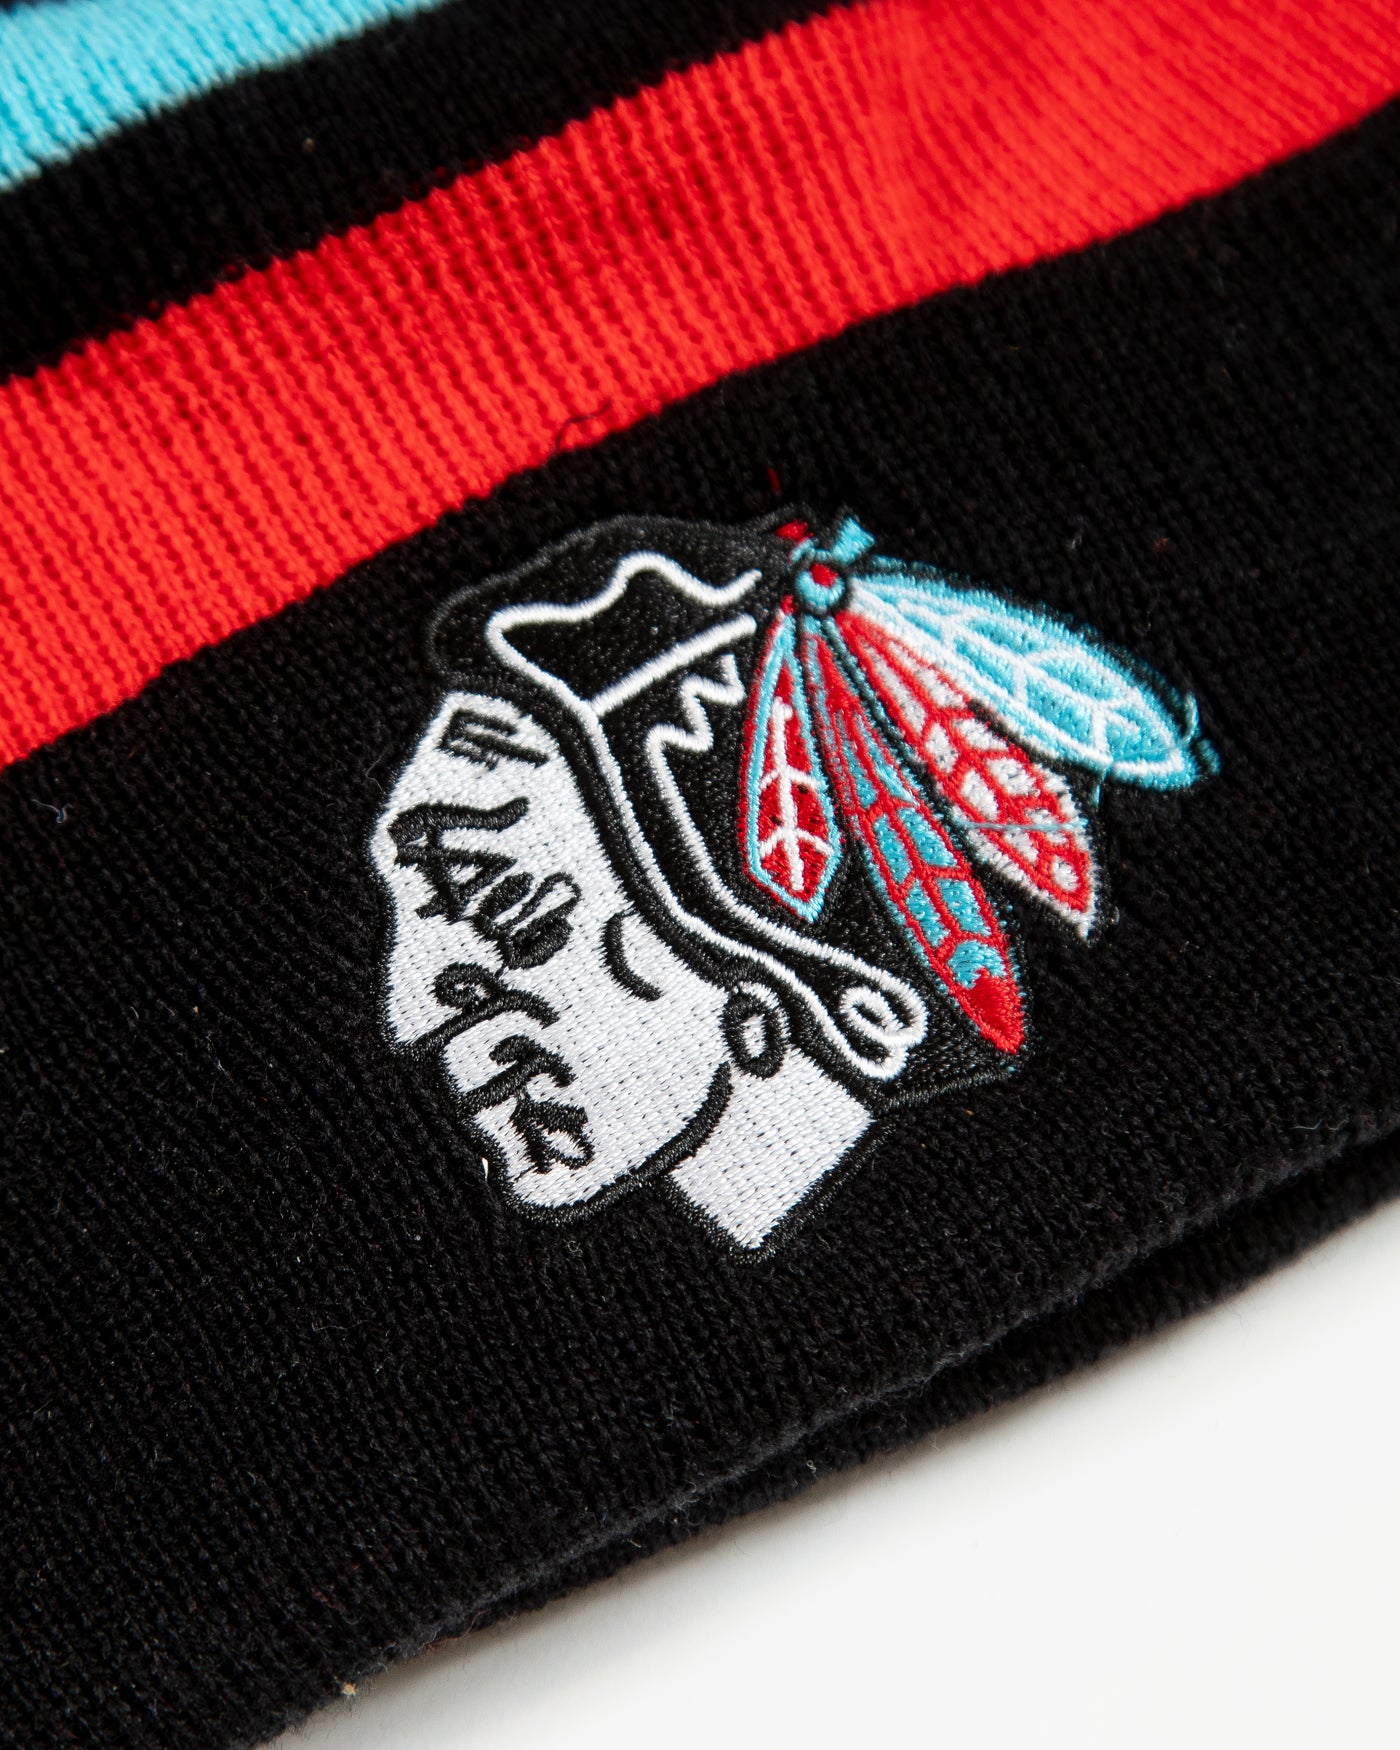 Four Stars knit hat with stripes and pom and Chicago Blackhawks primary logo in Chicago flag inspired colorway - detail logo angle lay flat